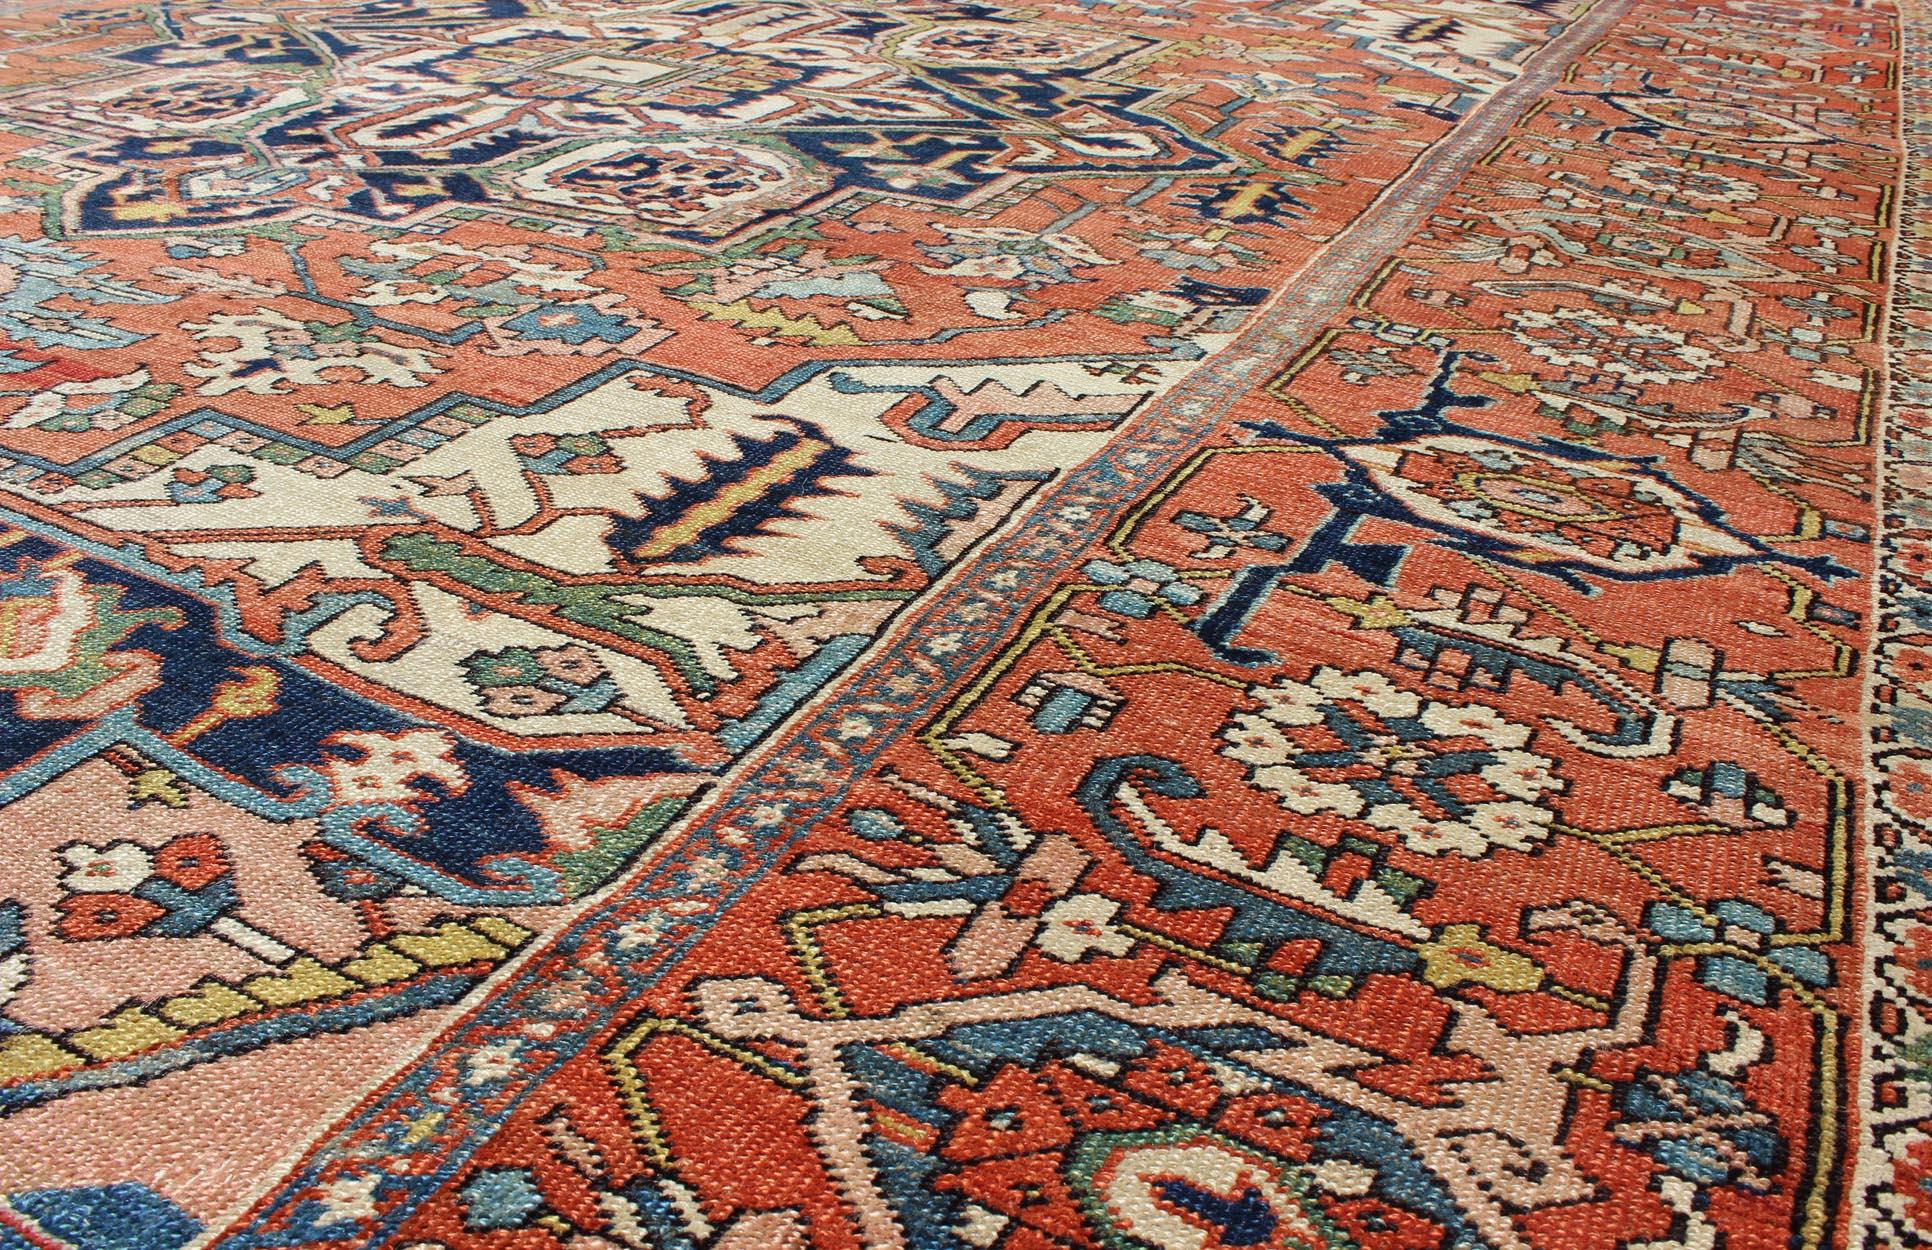 Wool Antique Persian Serapi Rug with Bold Medallion in Orange, Navy Blue and Green